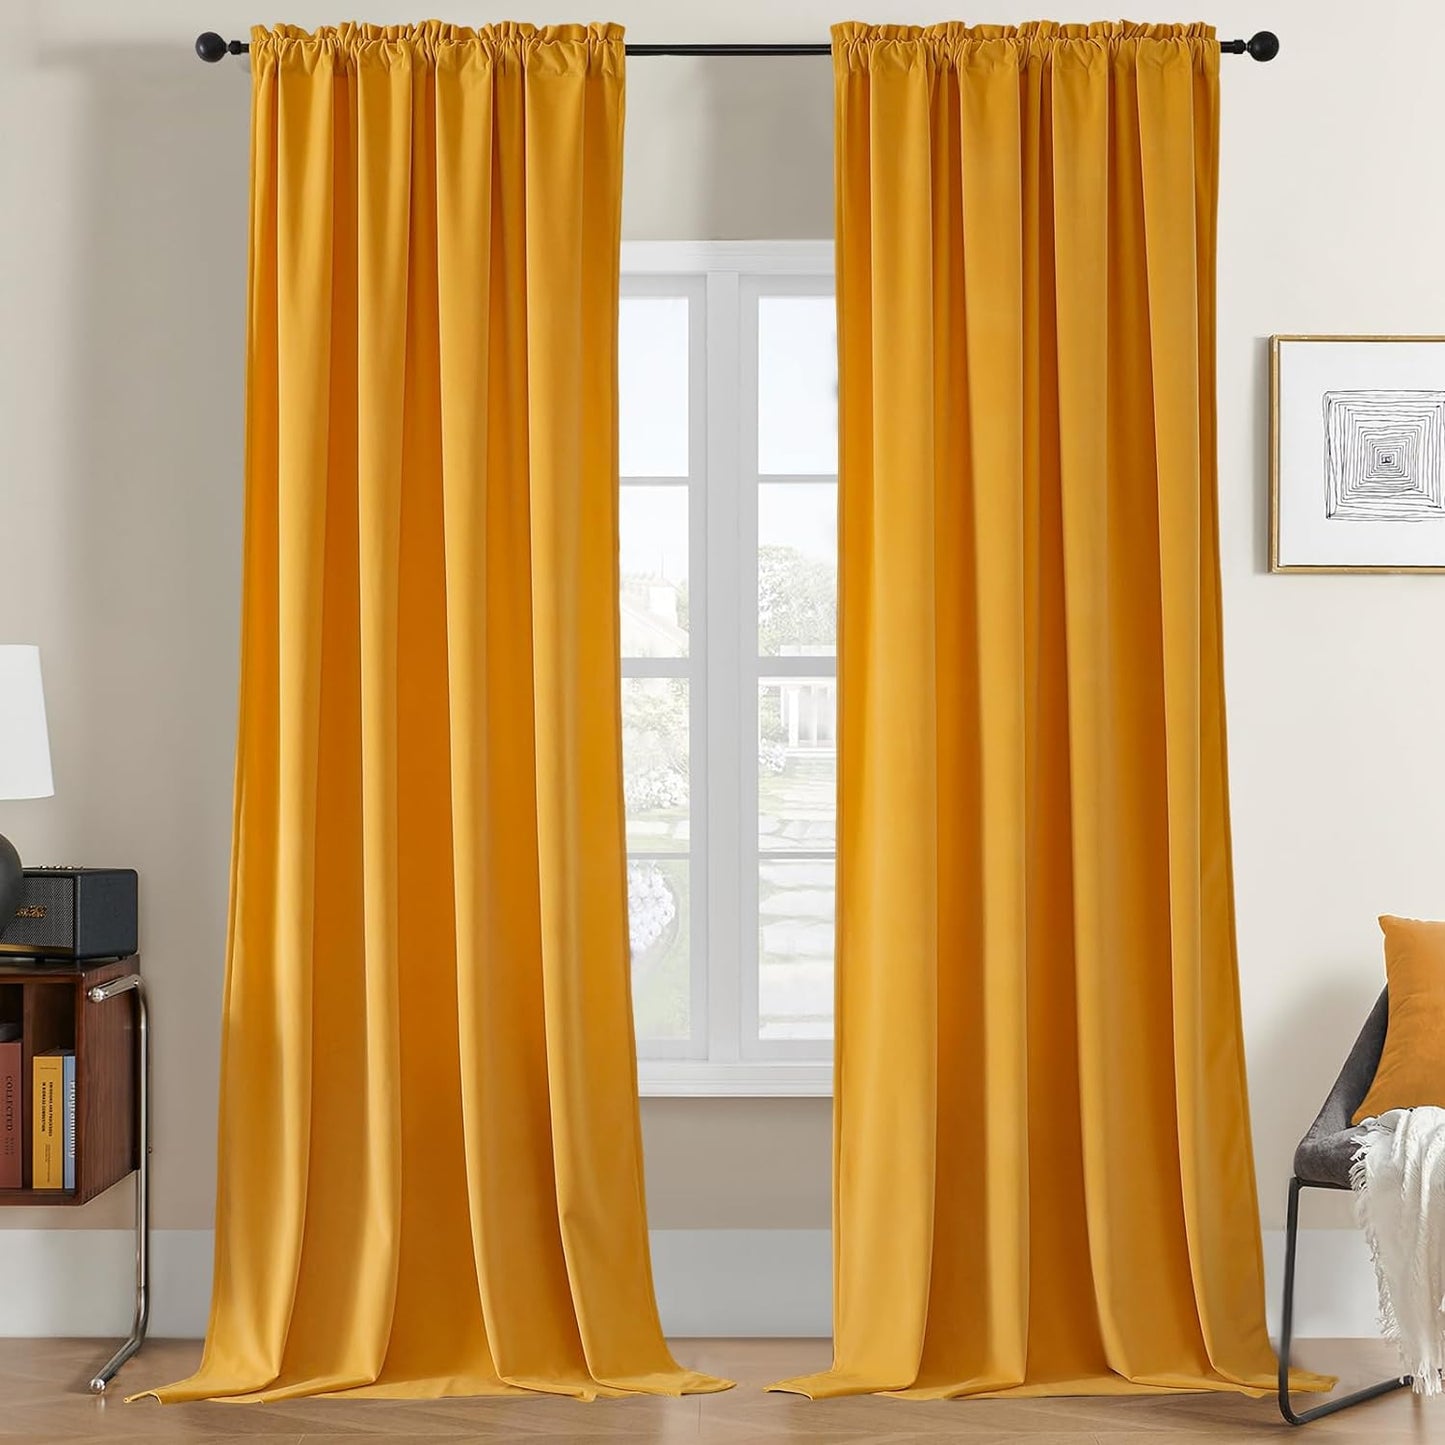 Joydeco Black Velvet Curtains 90 Inch Length 2 Panels, Luxury Blackout Rod Pocket Thermal Insulated Window Curtains, Super Soft Room Darkening Drapes for Living Dining Room Bedroom,W52 X L90 Inches  Joydeco Rod Pocket | Golden Yellow 52W X 84L Inch X 2 Panels 